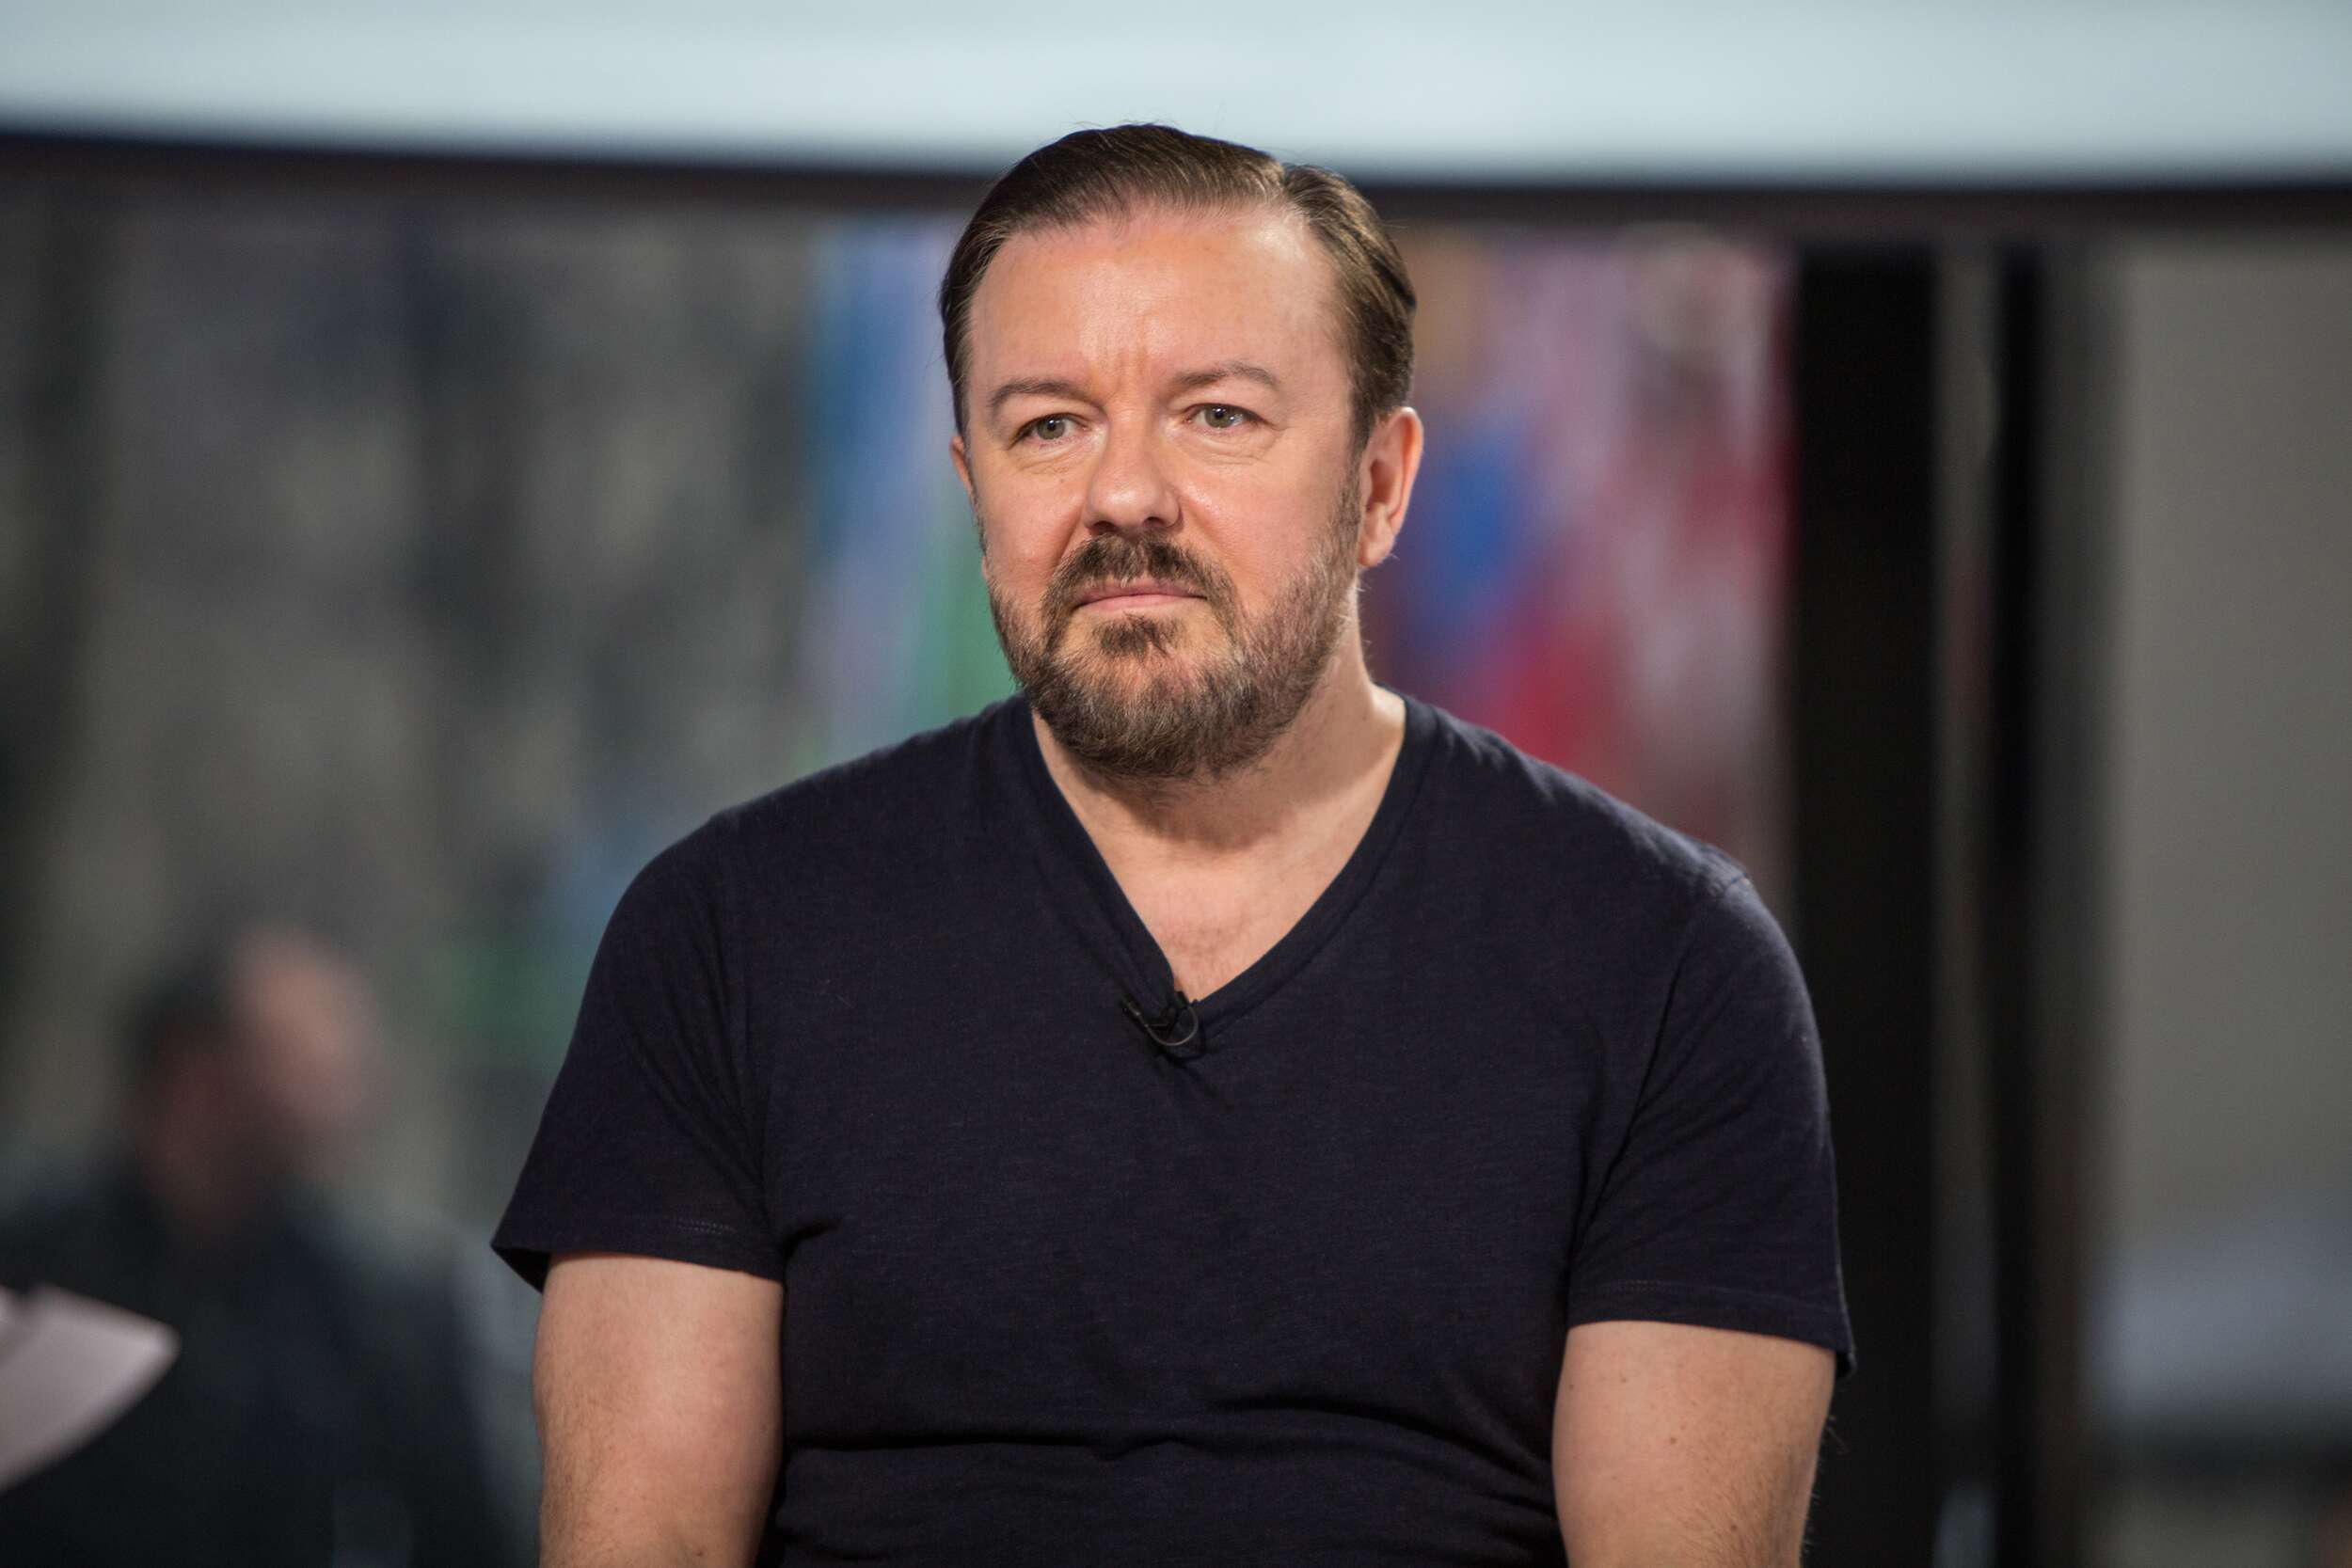 Top 10 Richest Comedian In the United Kingdom (2022): Ricky Gervais